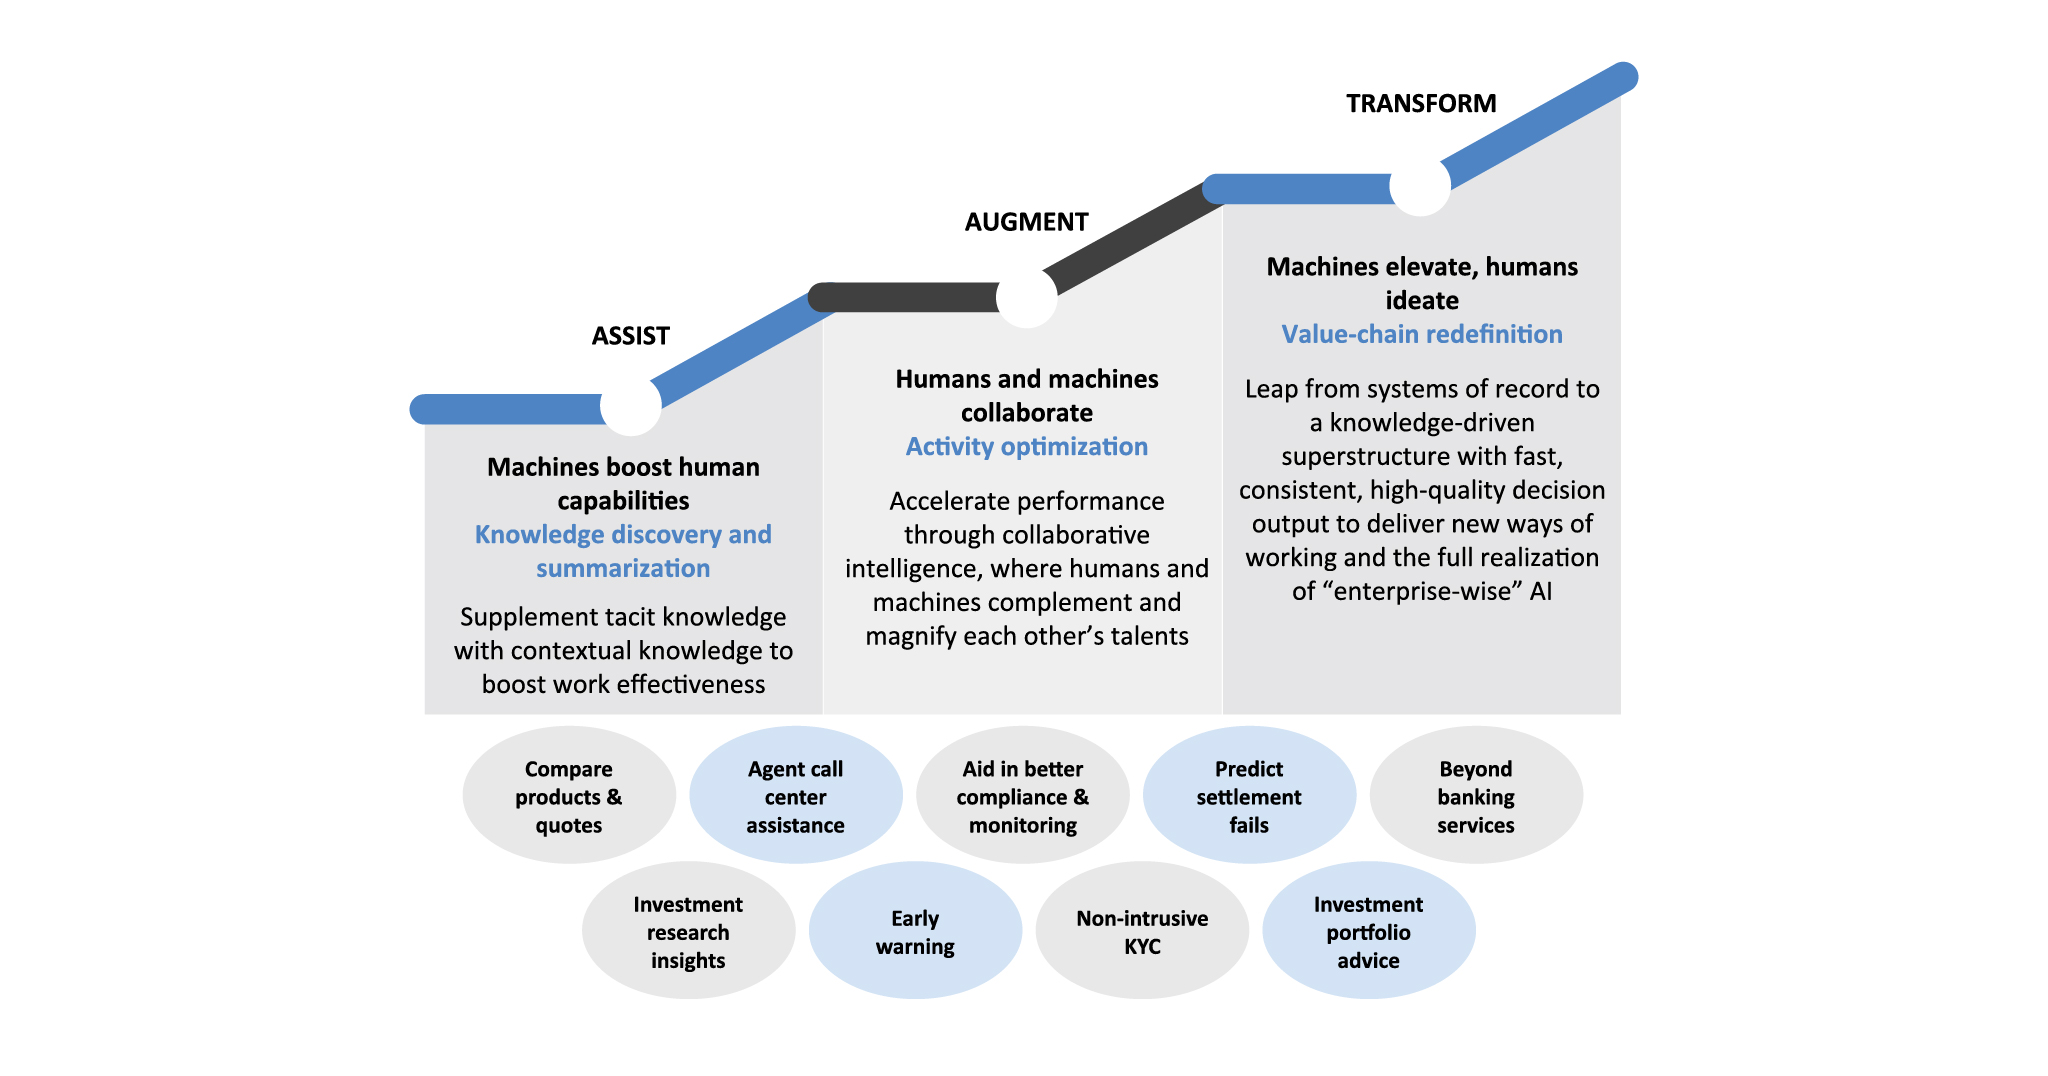 The TCS path of AI potential to performance spans across the three stages – assist, augment, and transform.